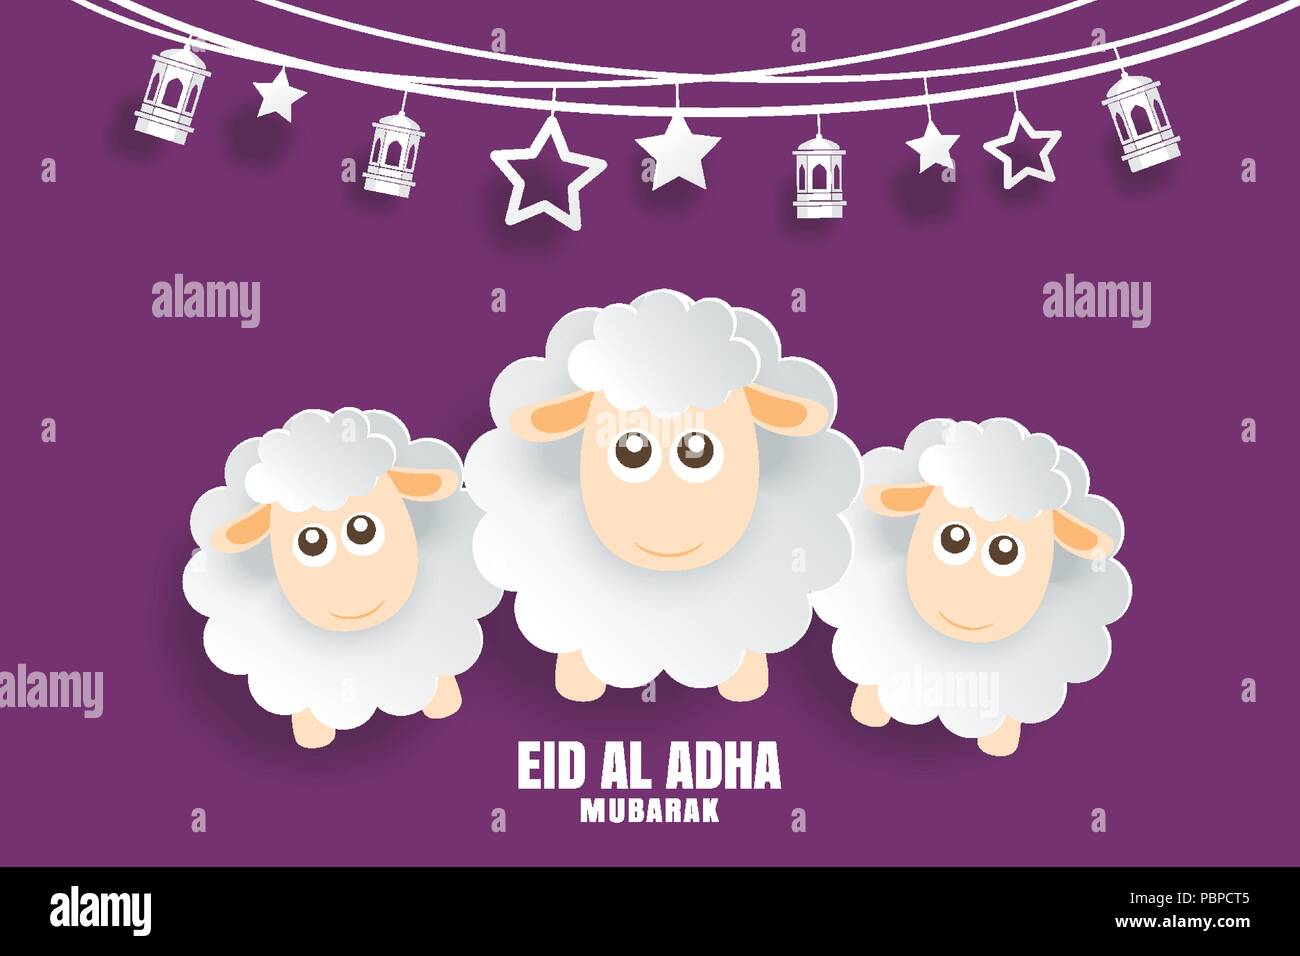 Eid Al Adha Mubarak celebration card with sheep in paper art purple background. Use for banner, poster, flyer, brochure sale template. Stock Vector